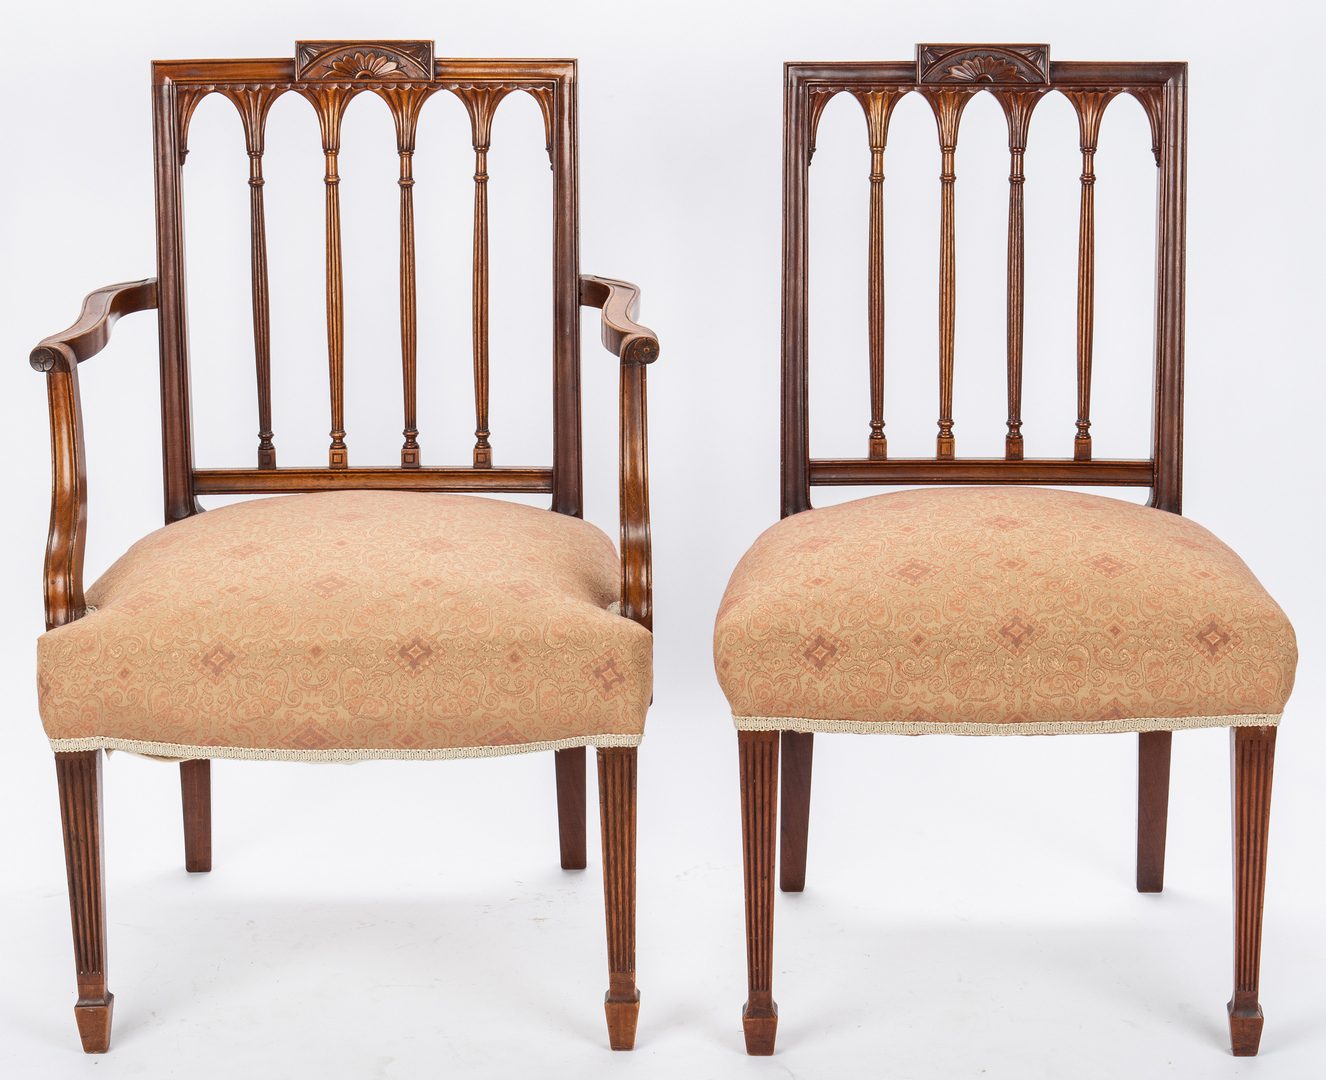 Lot 111: 2 American Federal Square-Back Chairs